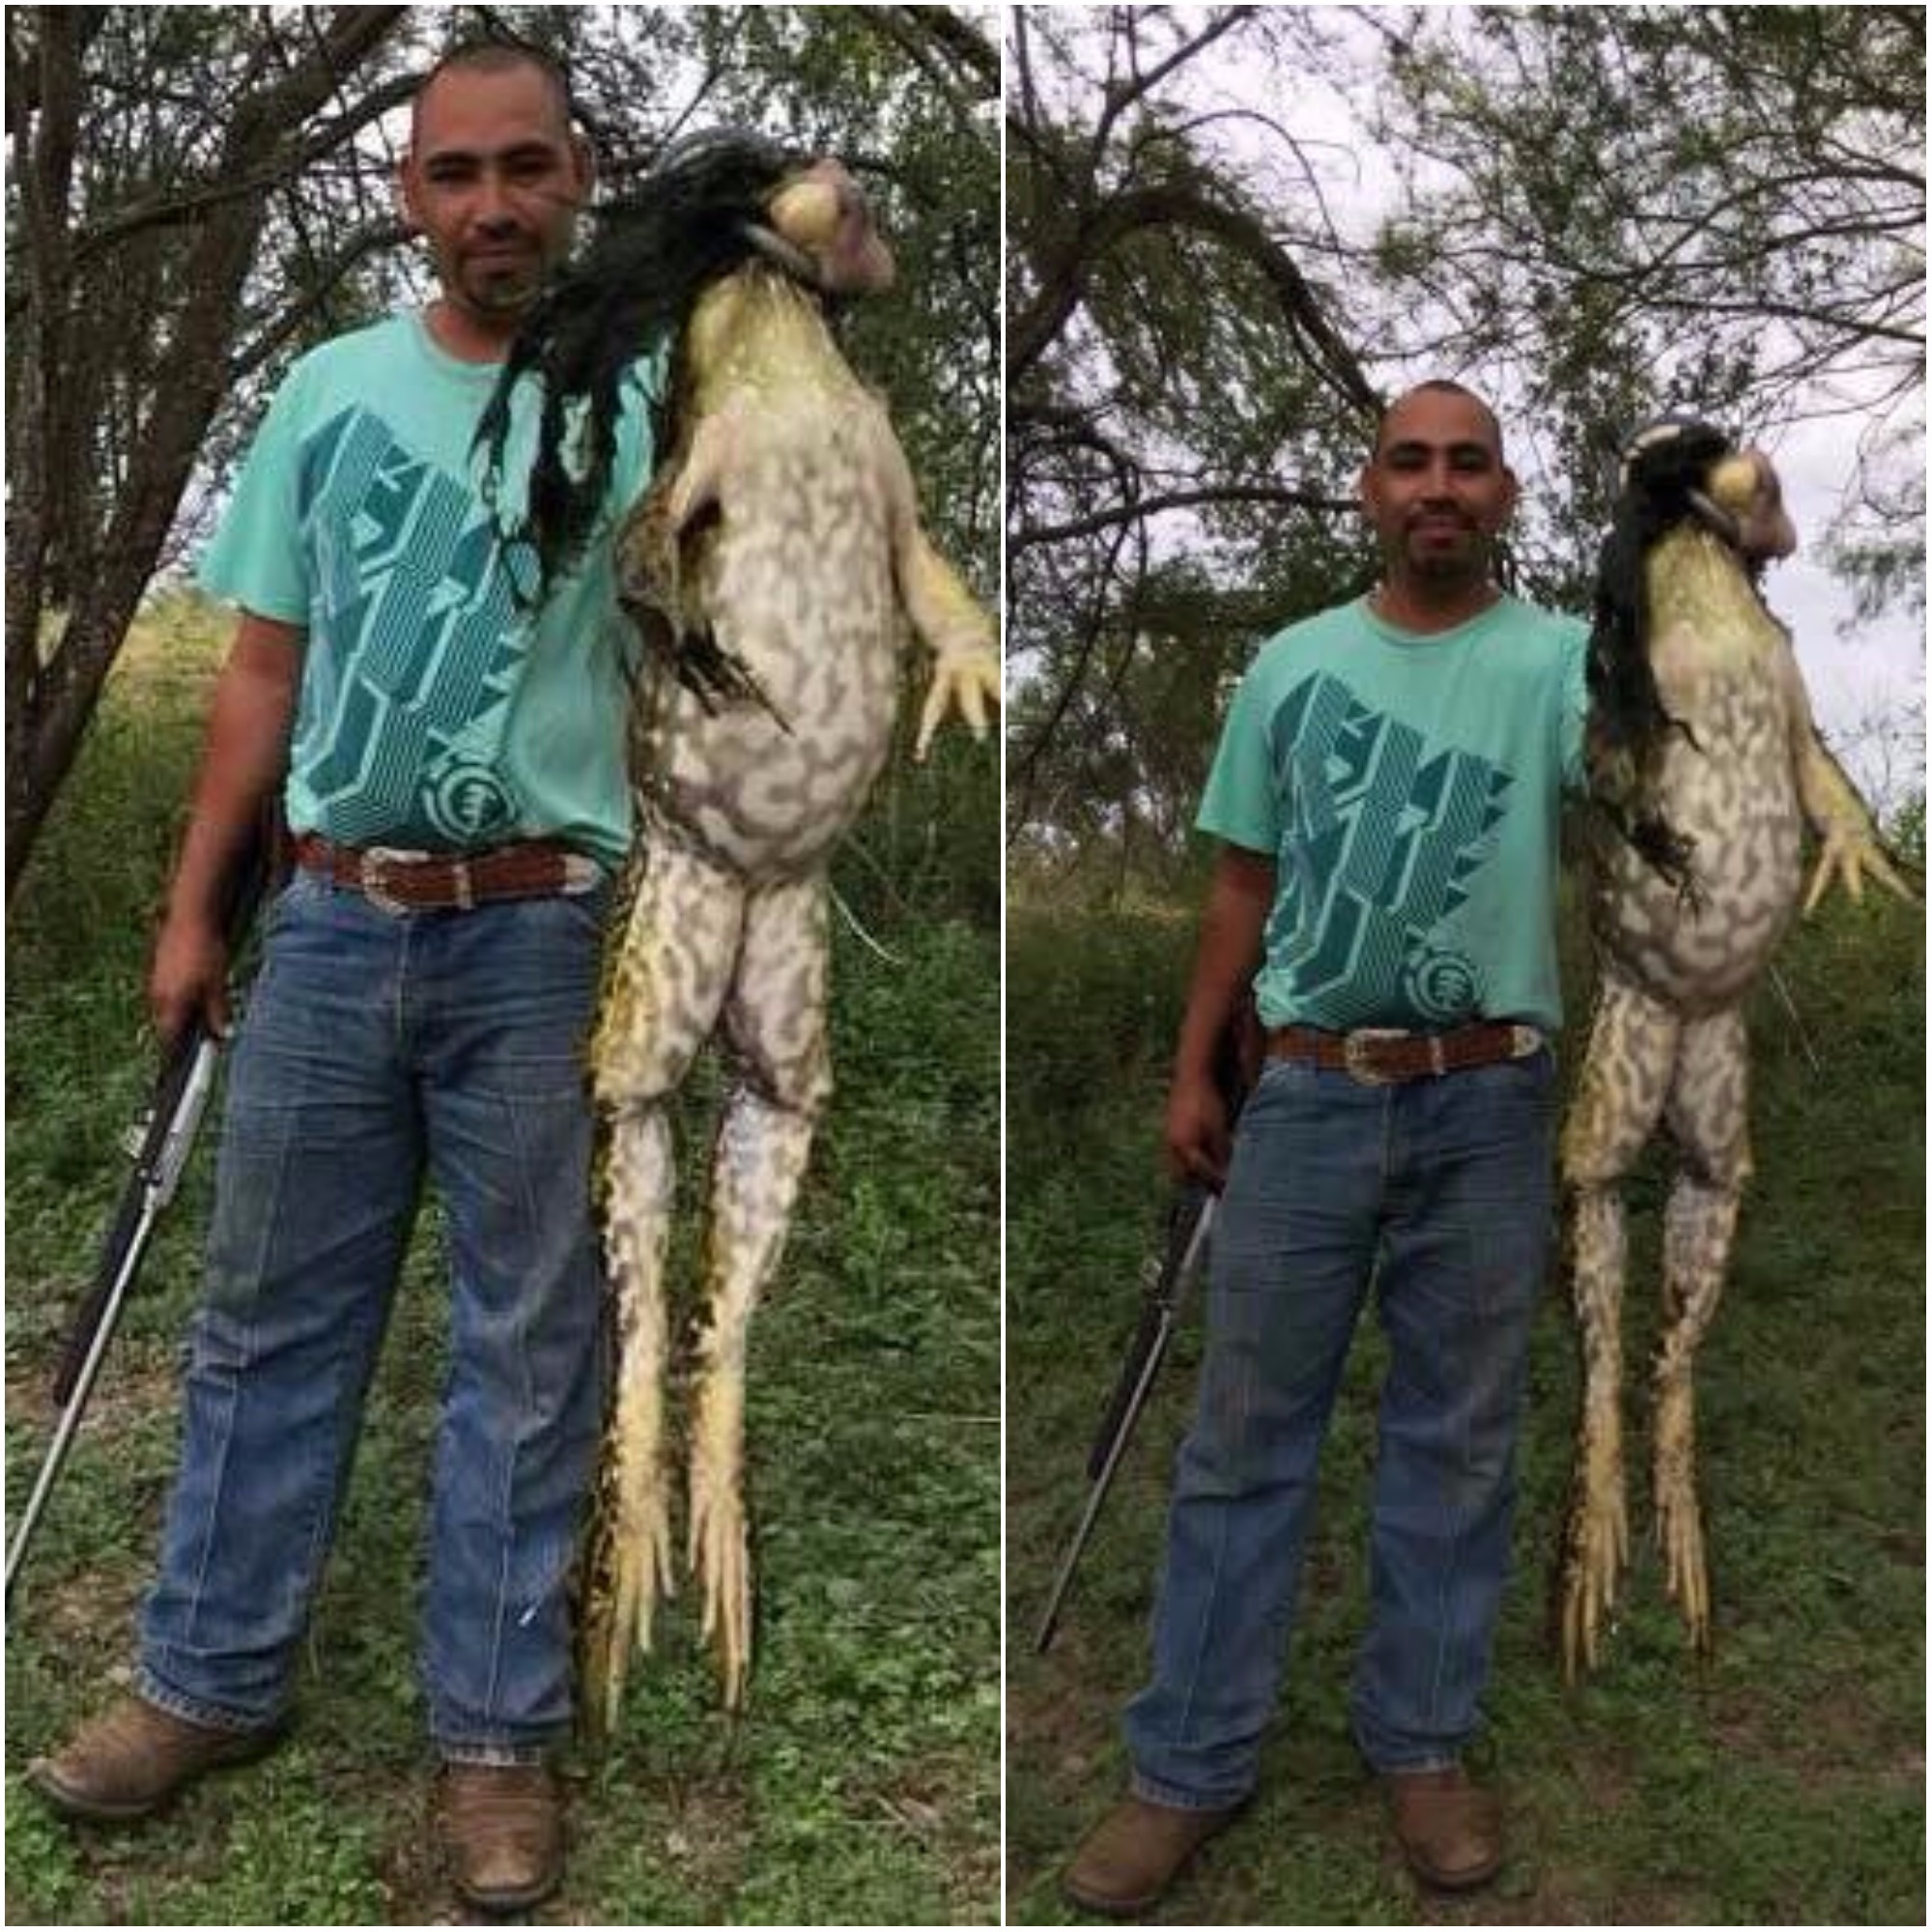 A Texas man caught a monster bullfrog, and the internet is grossed out